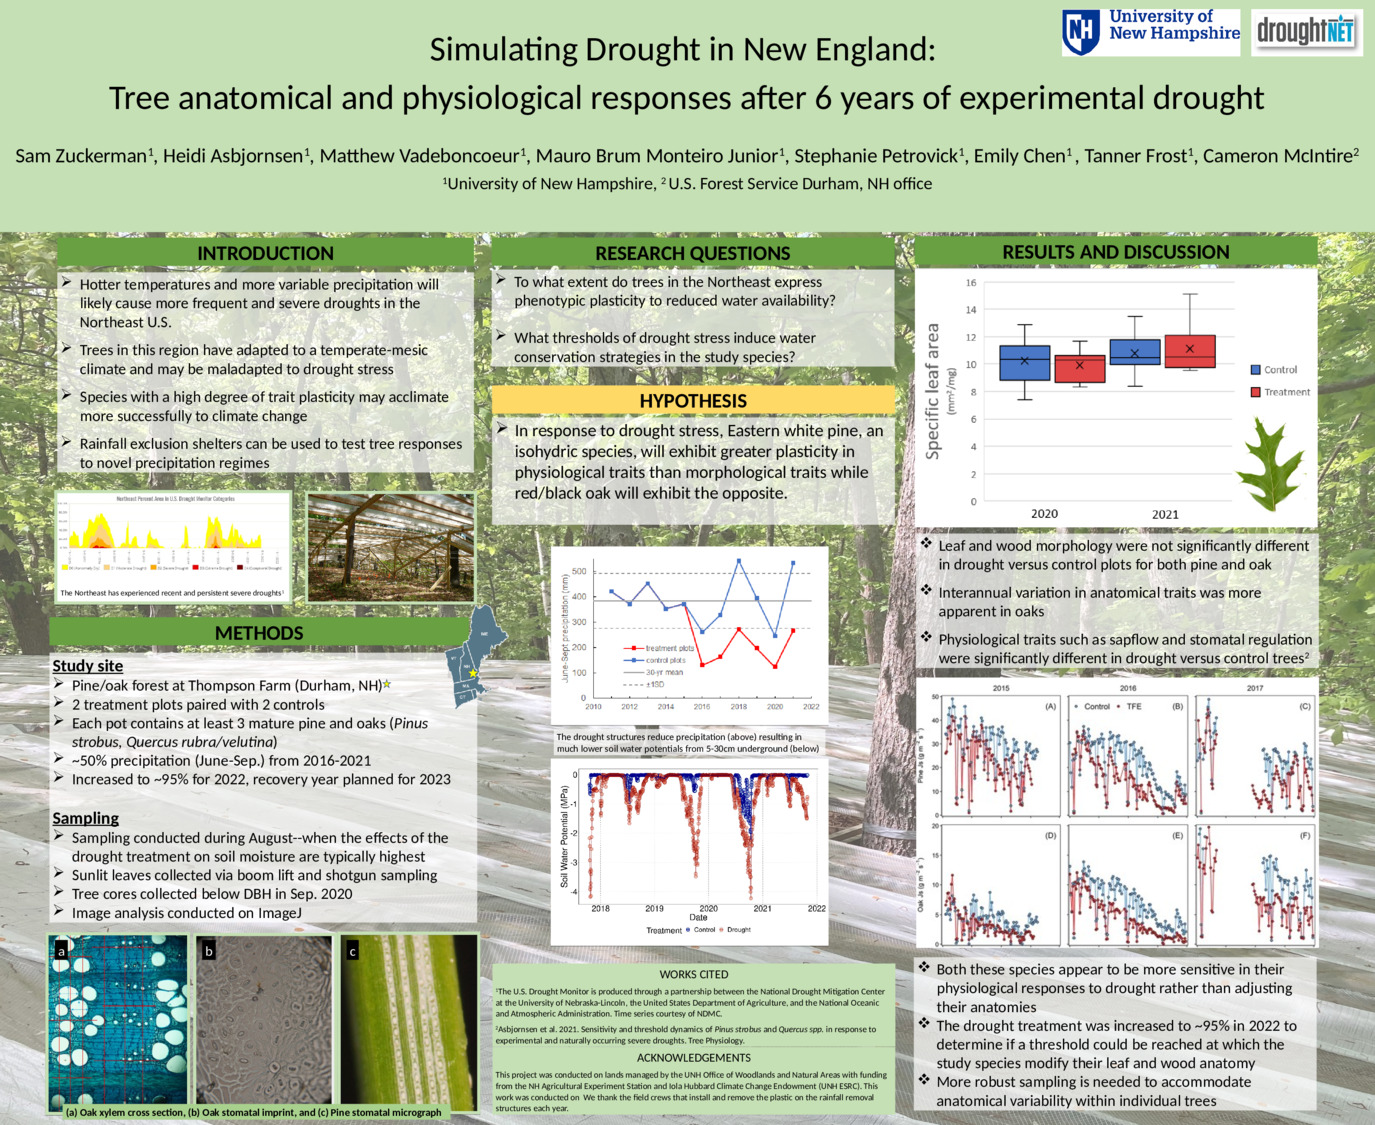 Simulating Drought In New England: Tree Anatomical And Physiological Responses After 6 Years Of Experimental Drought by sz1061